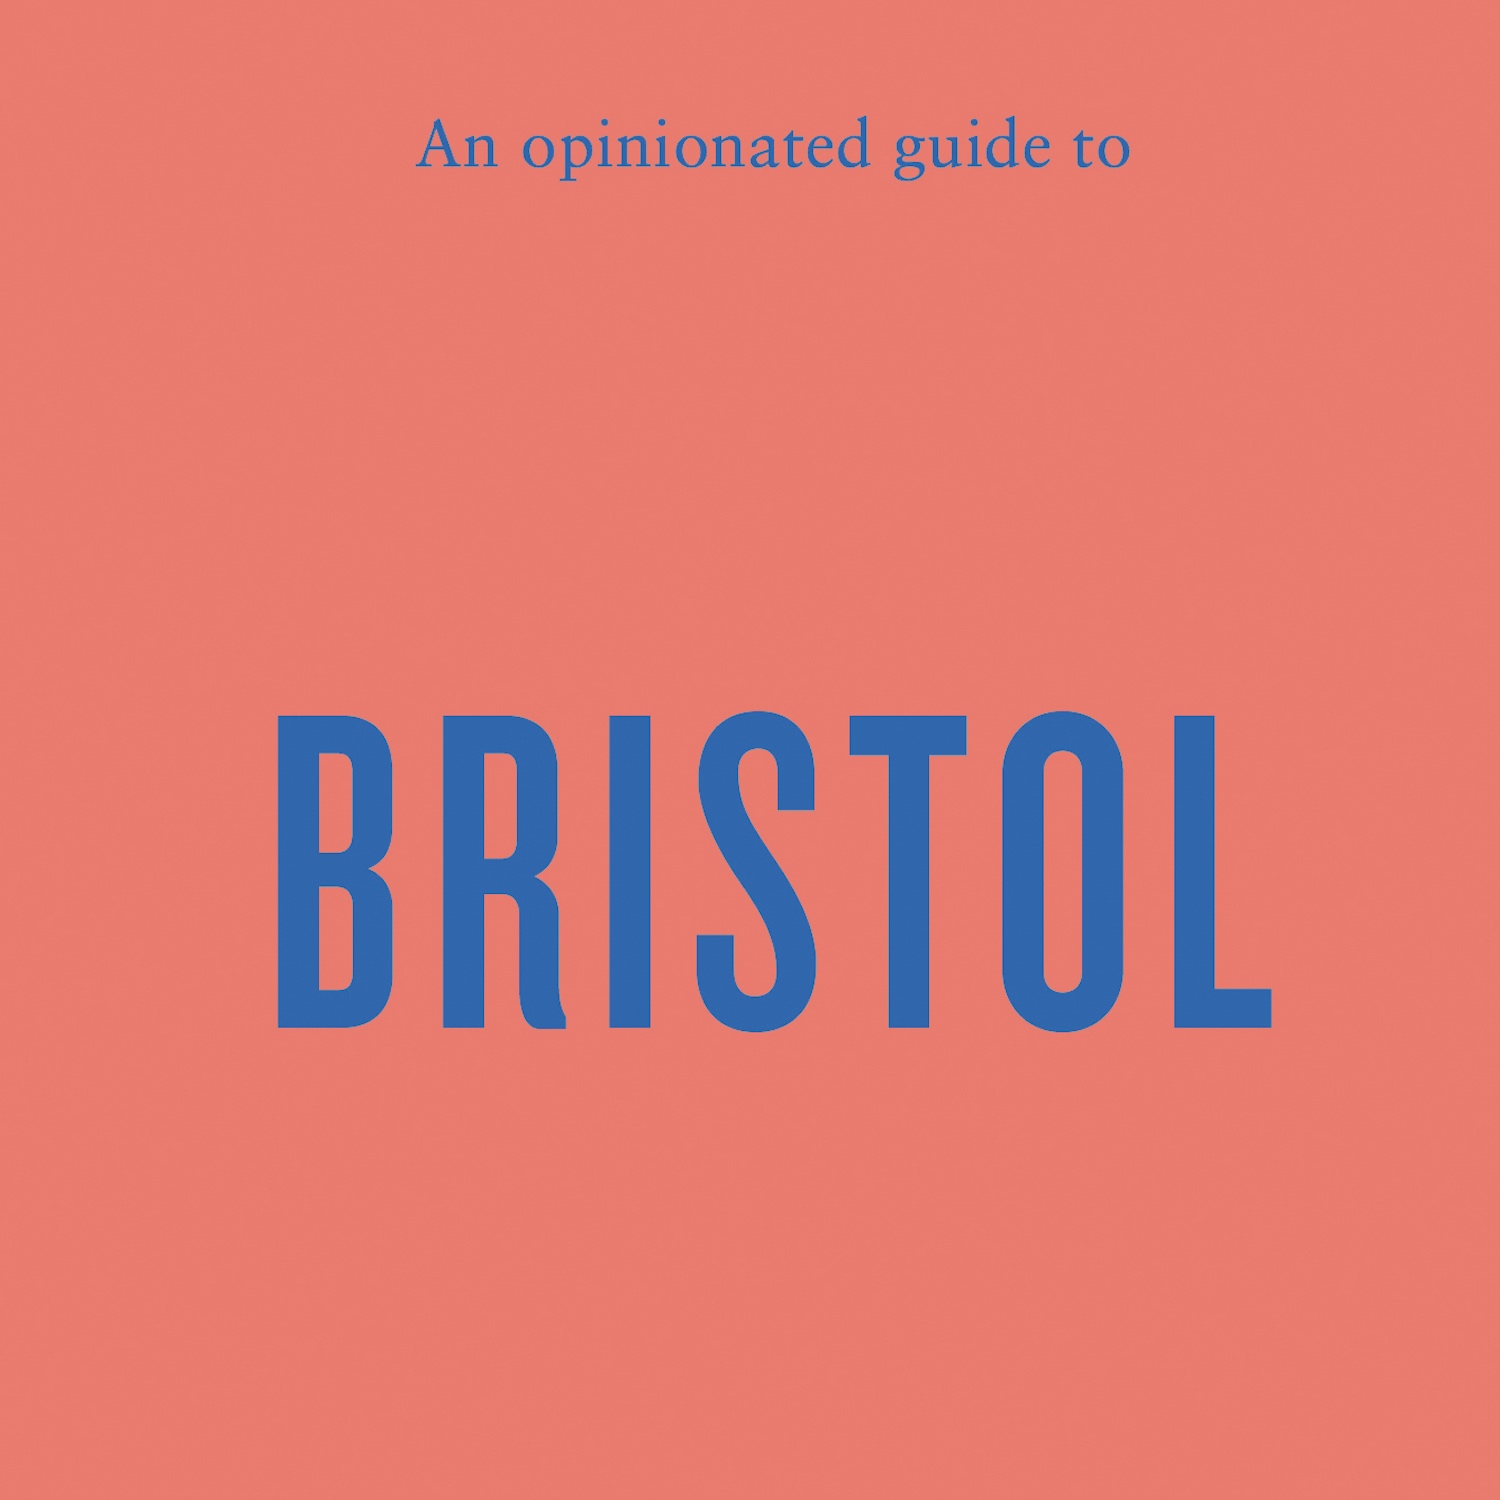 Win a copy of An Opinionated Guide to Bristol, by Florence Filose